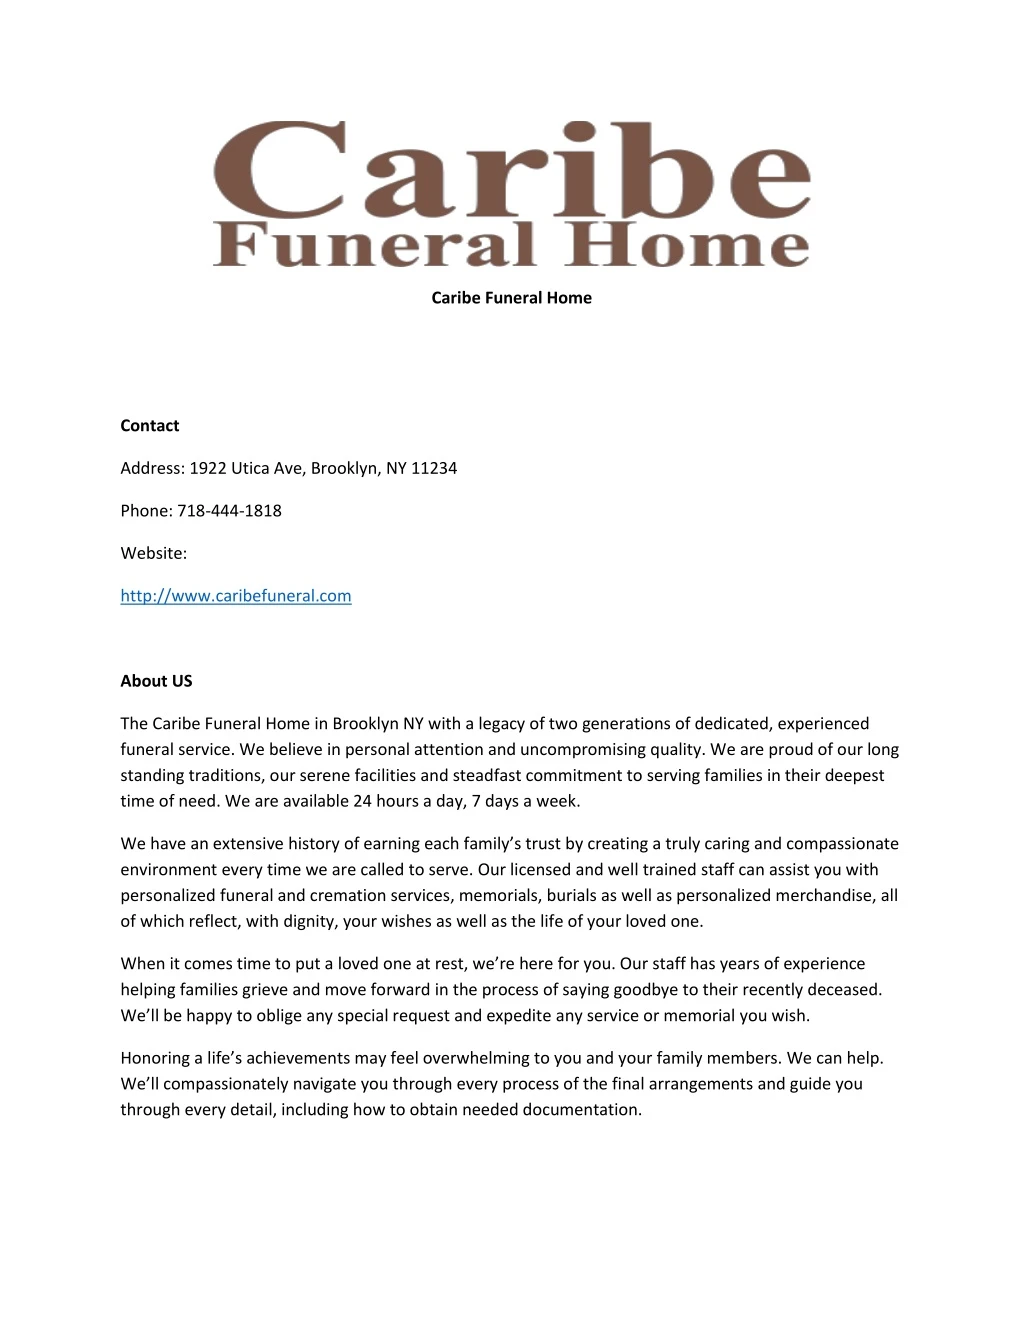 caribe funeral home